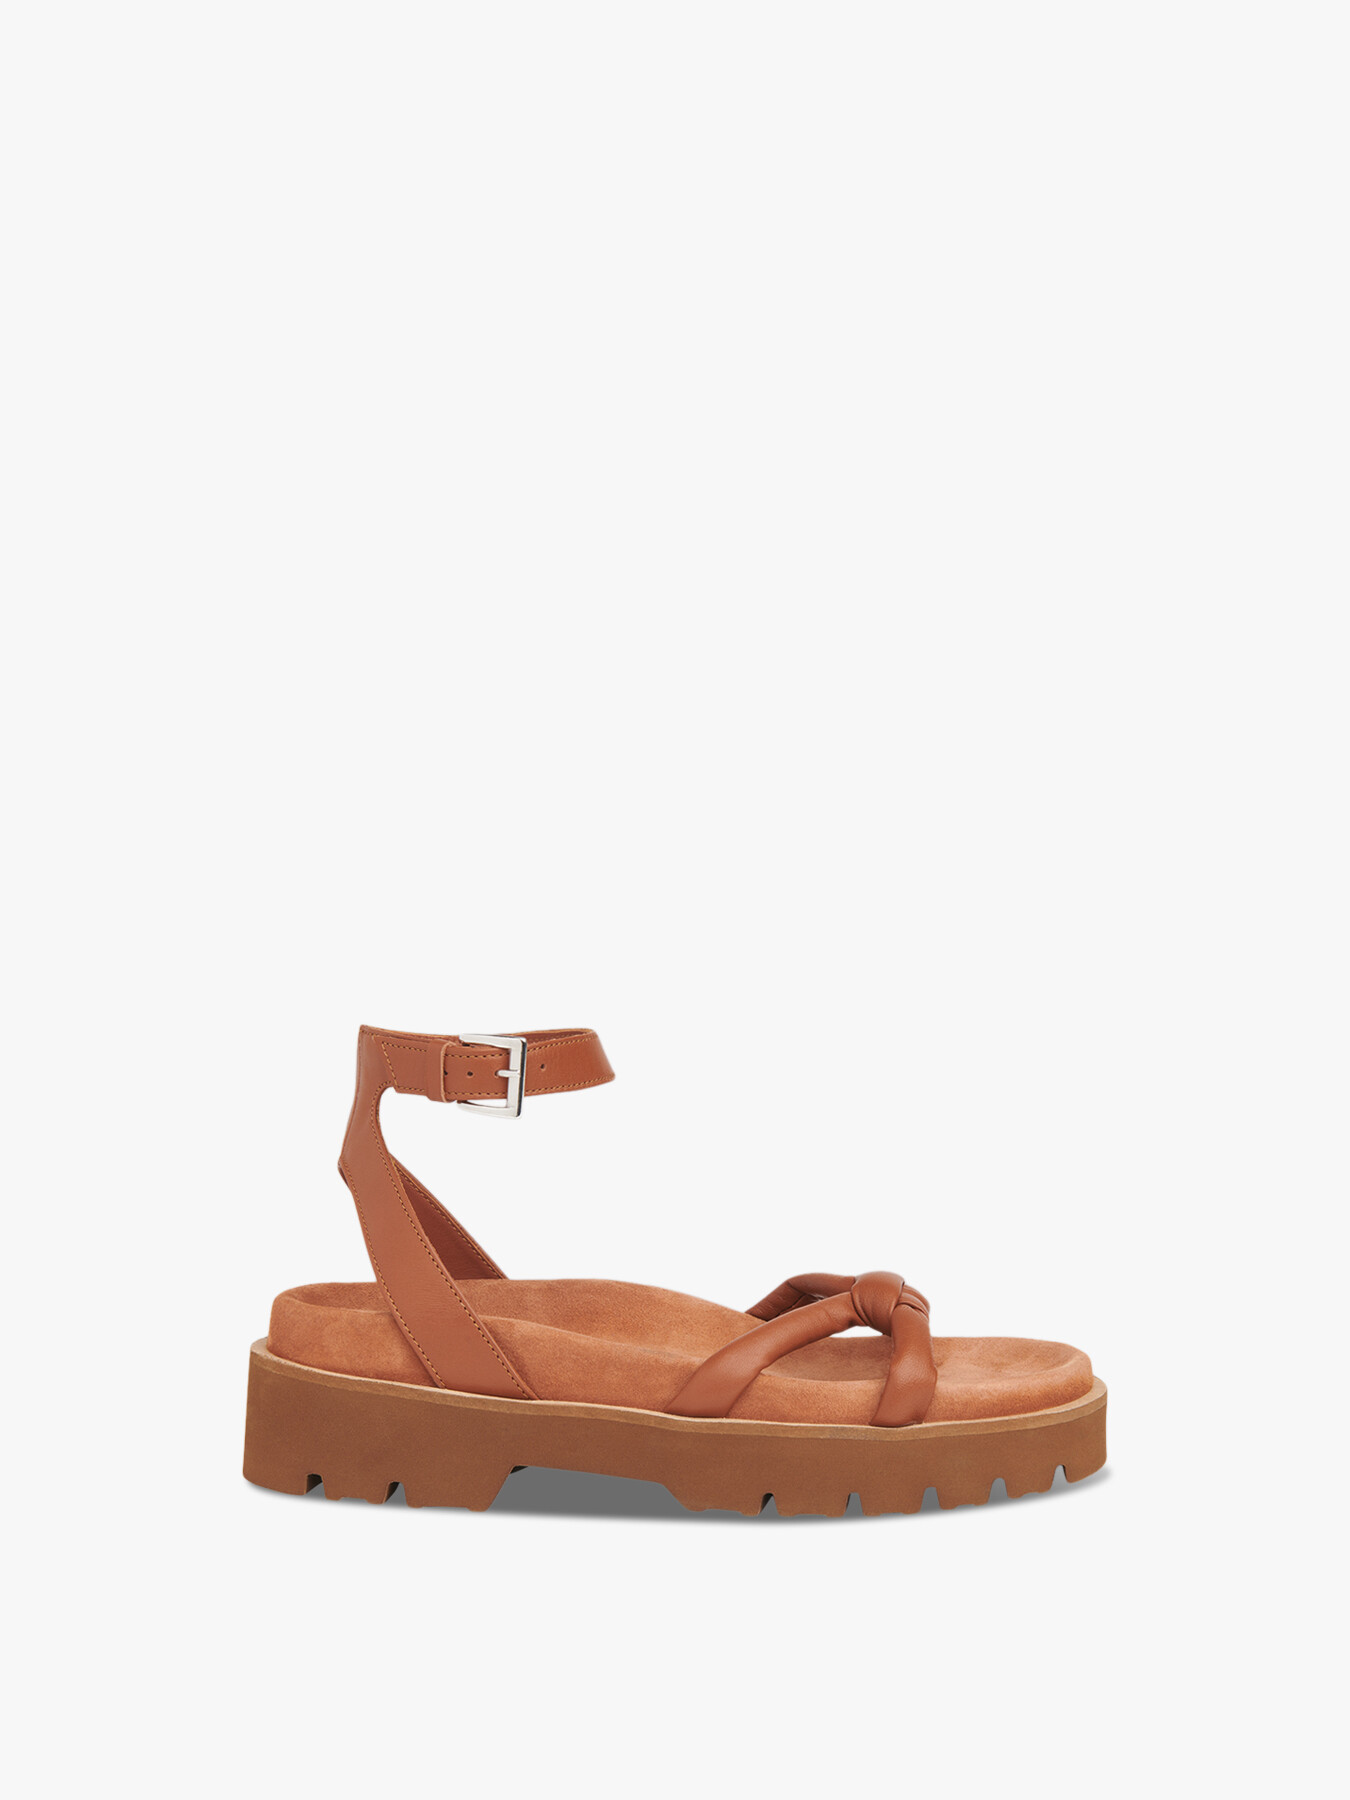 Whistles Mina Knotted Sandal In Tan